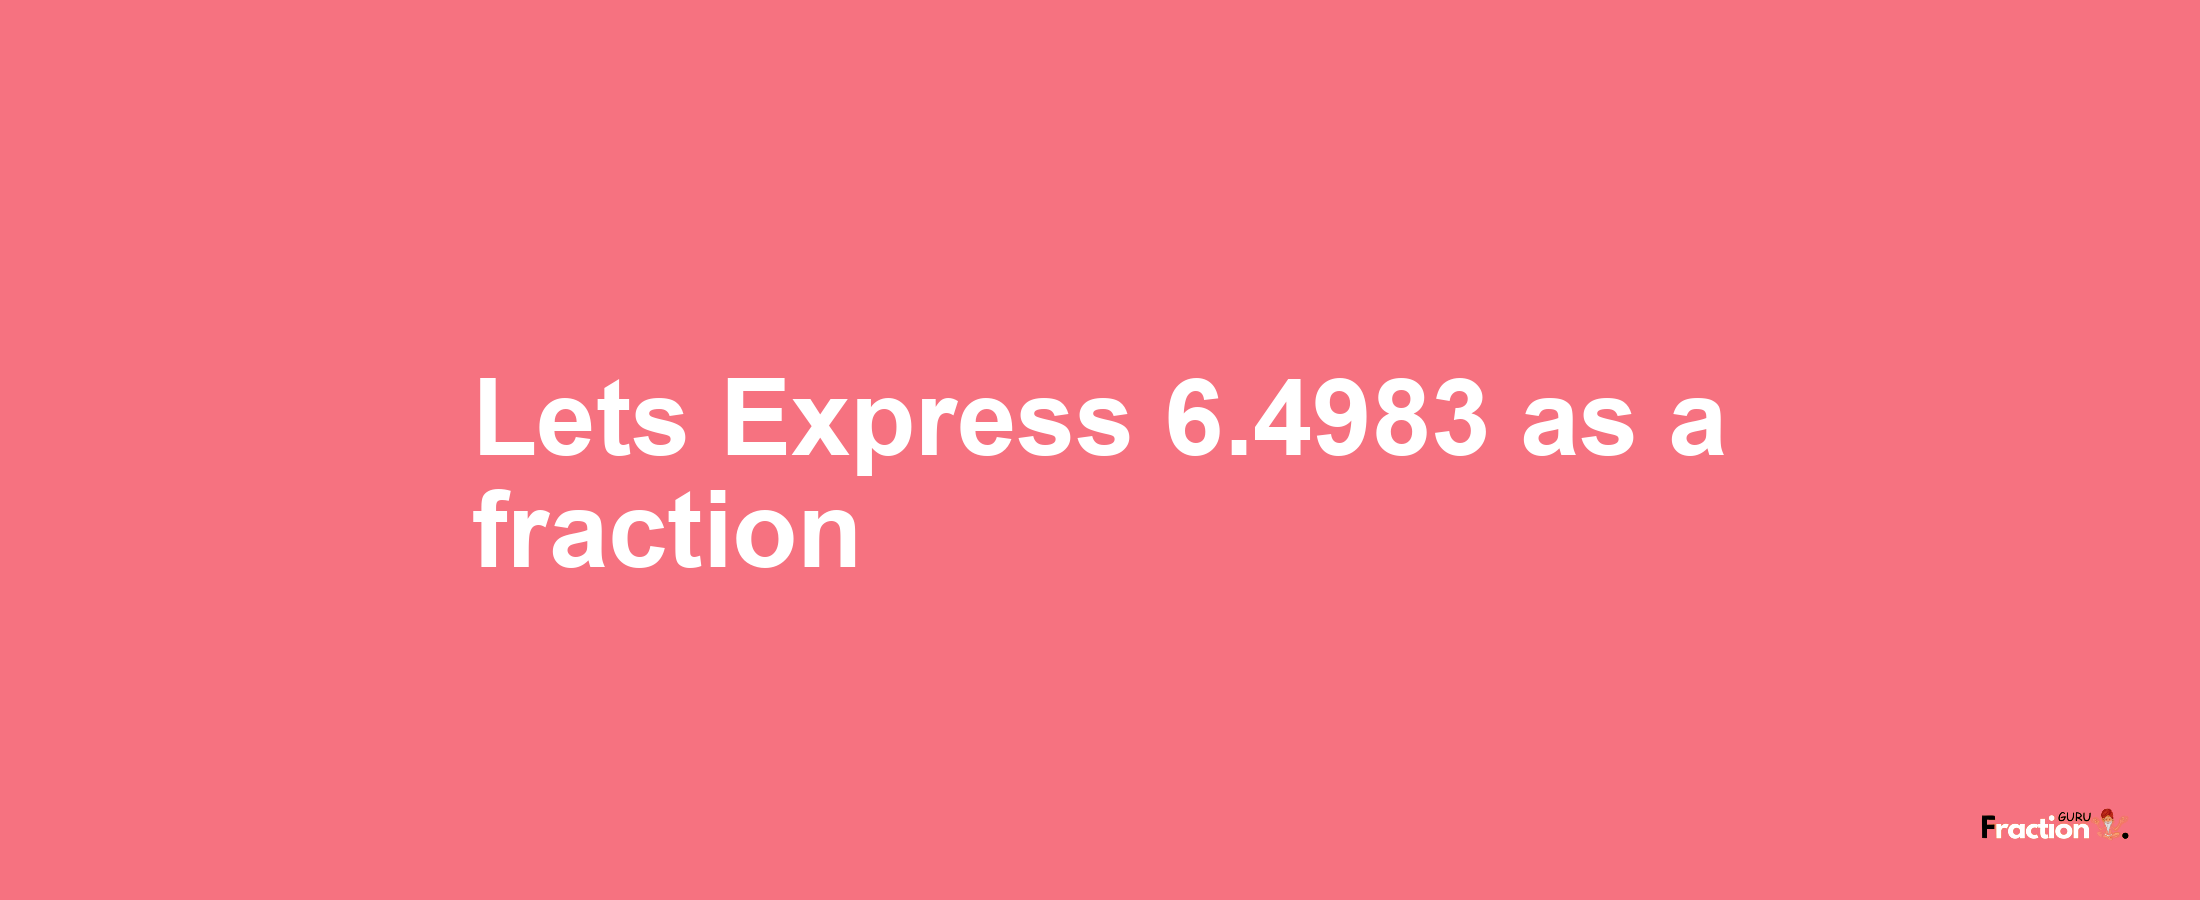 Lets Express 6.4983 as afraction